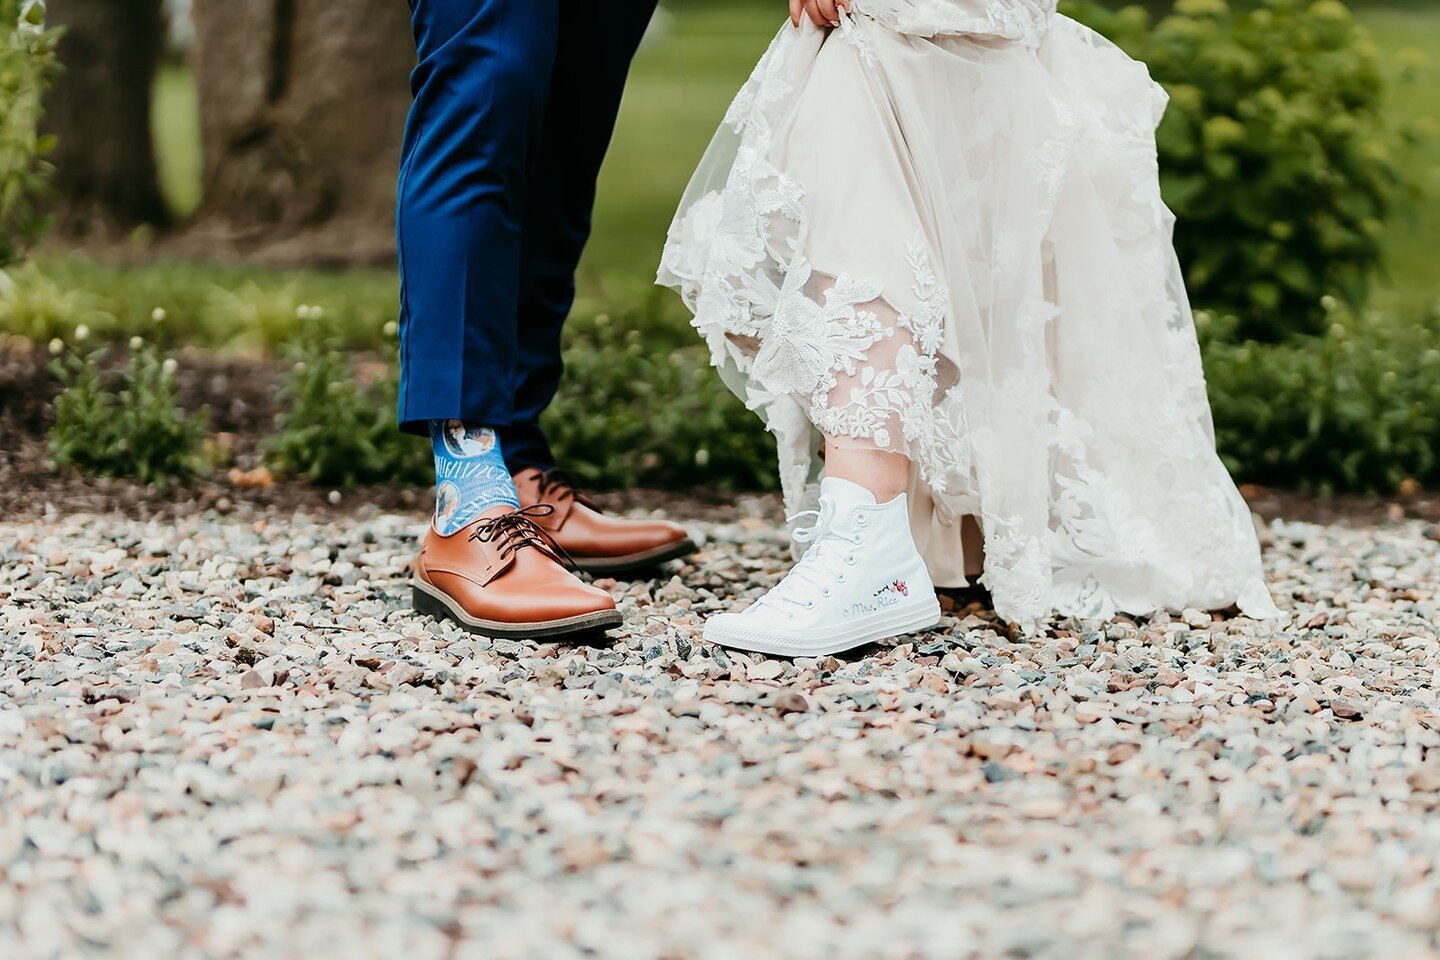 A reminder from Alysha + Phil to put your best foot forward on your wedding day 😌

Photos by Morales Photography

#AncestralAcresLodge #HistoricHome #EventVenue #EventSpace #PureMichigan #SWMichigan #WeddingVenue #MichiganWeddingVenue #RusticWedding